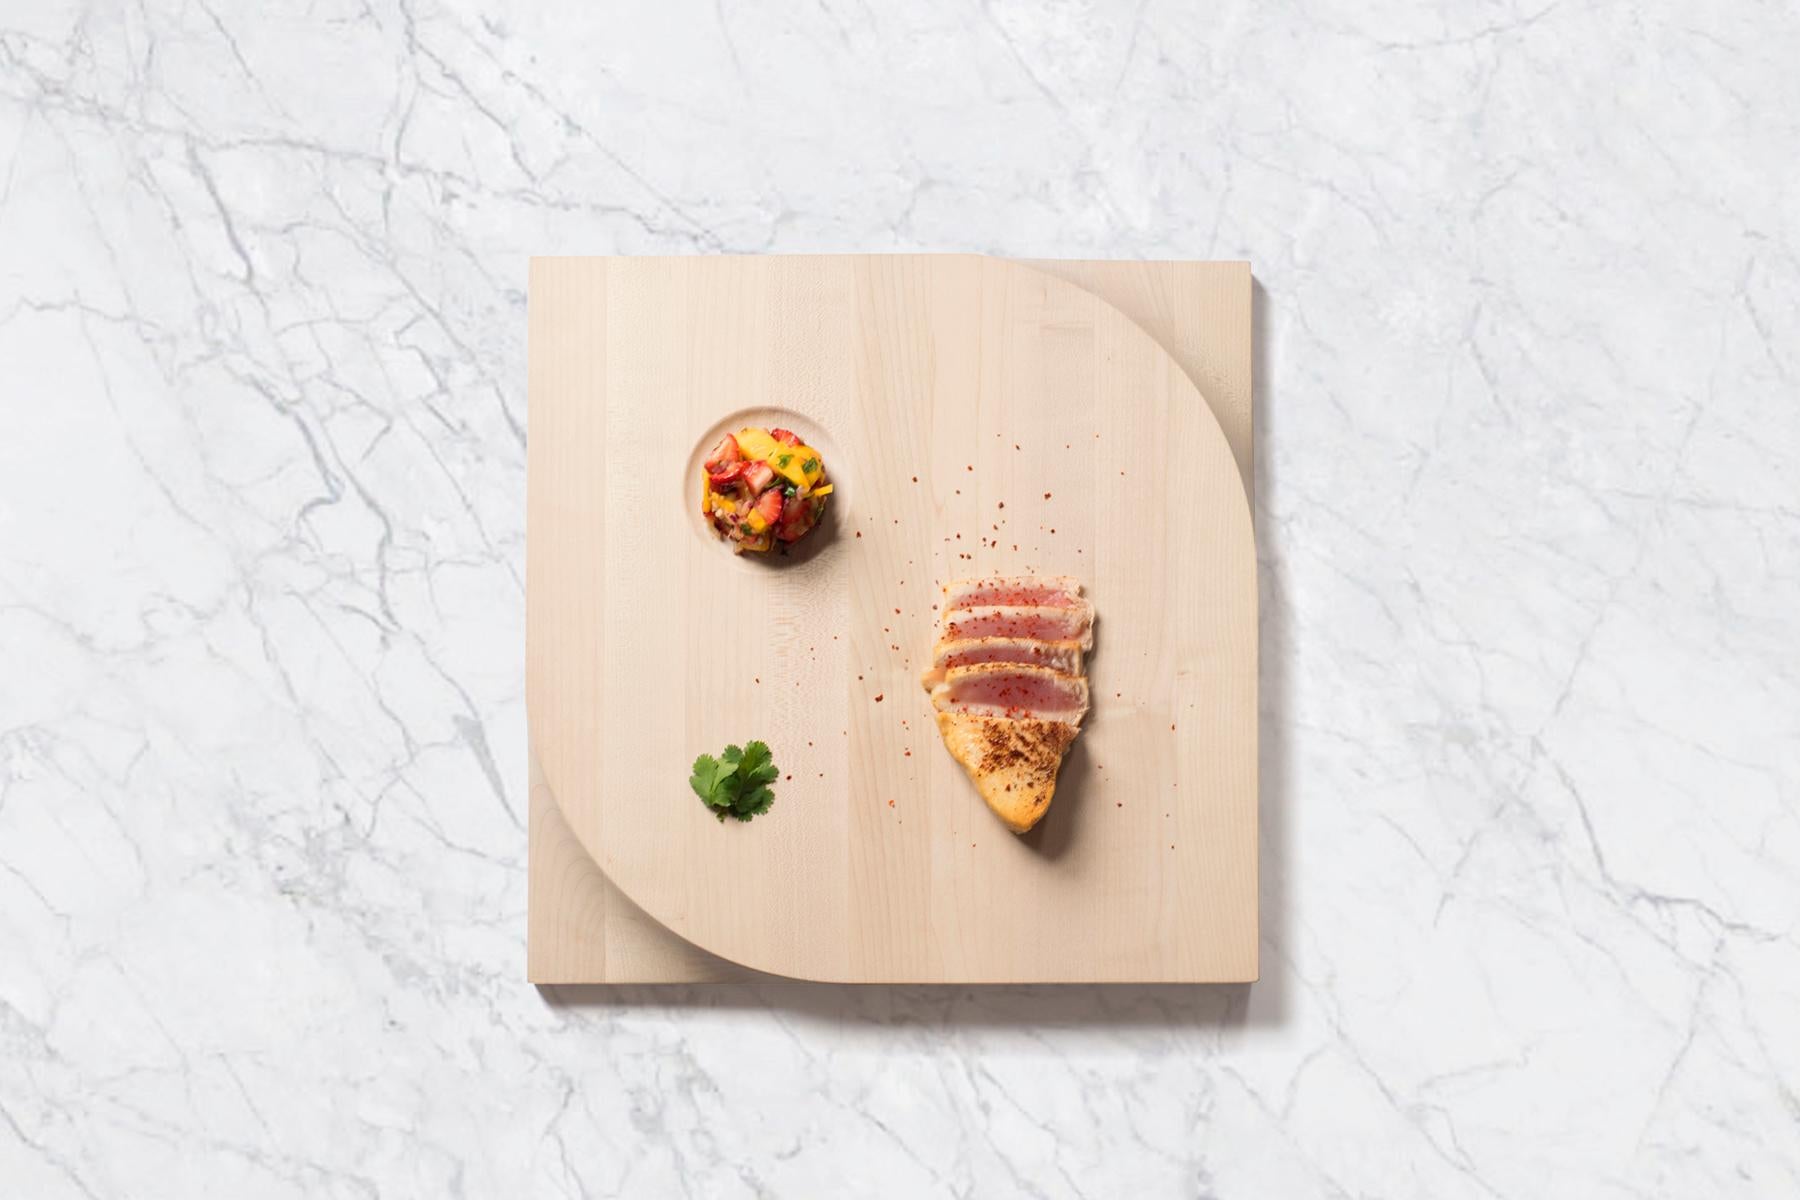 Beauty meets function. This two-sided cutting board is made with European maple butcher block and carved at the corners with an ergonomic shape for easy lifting and handling. It’s a dinner party staple accommodating your laborious food preparation